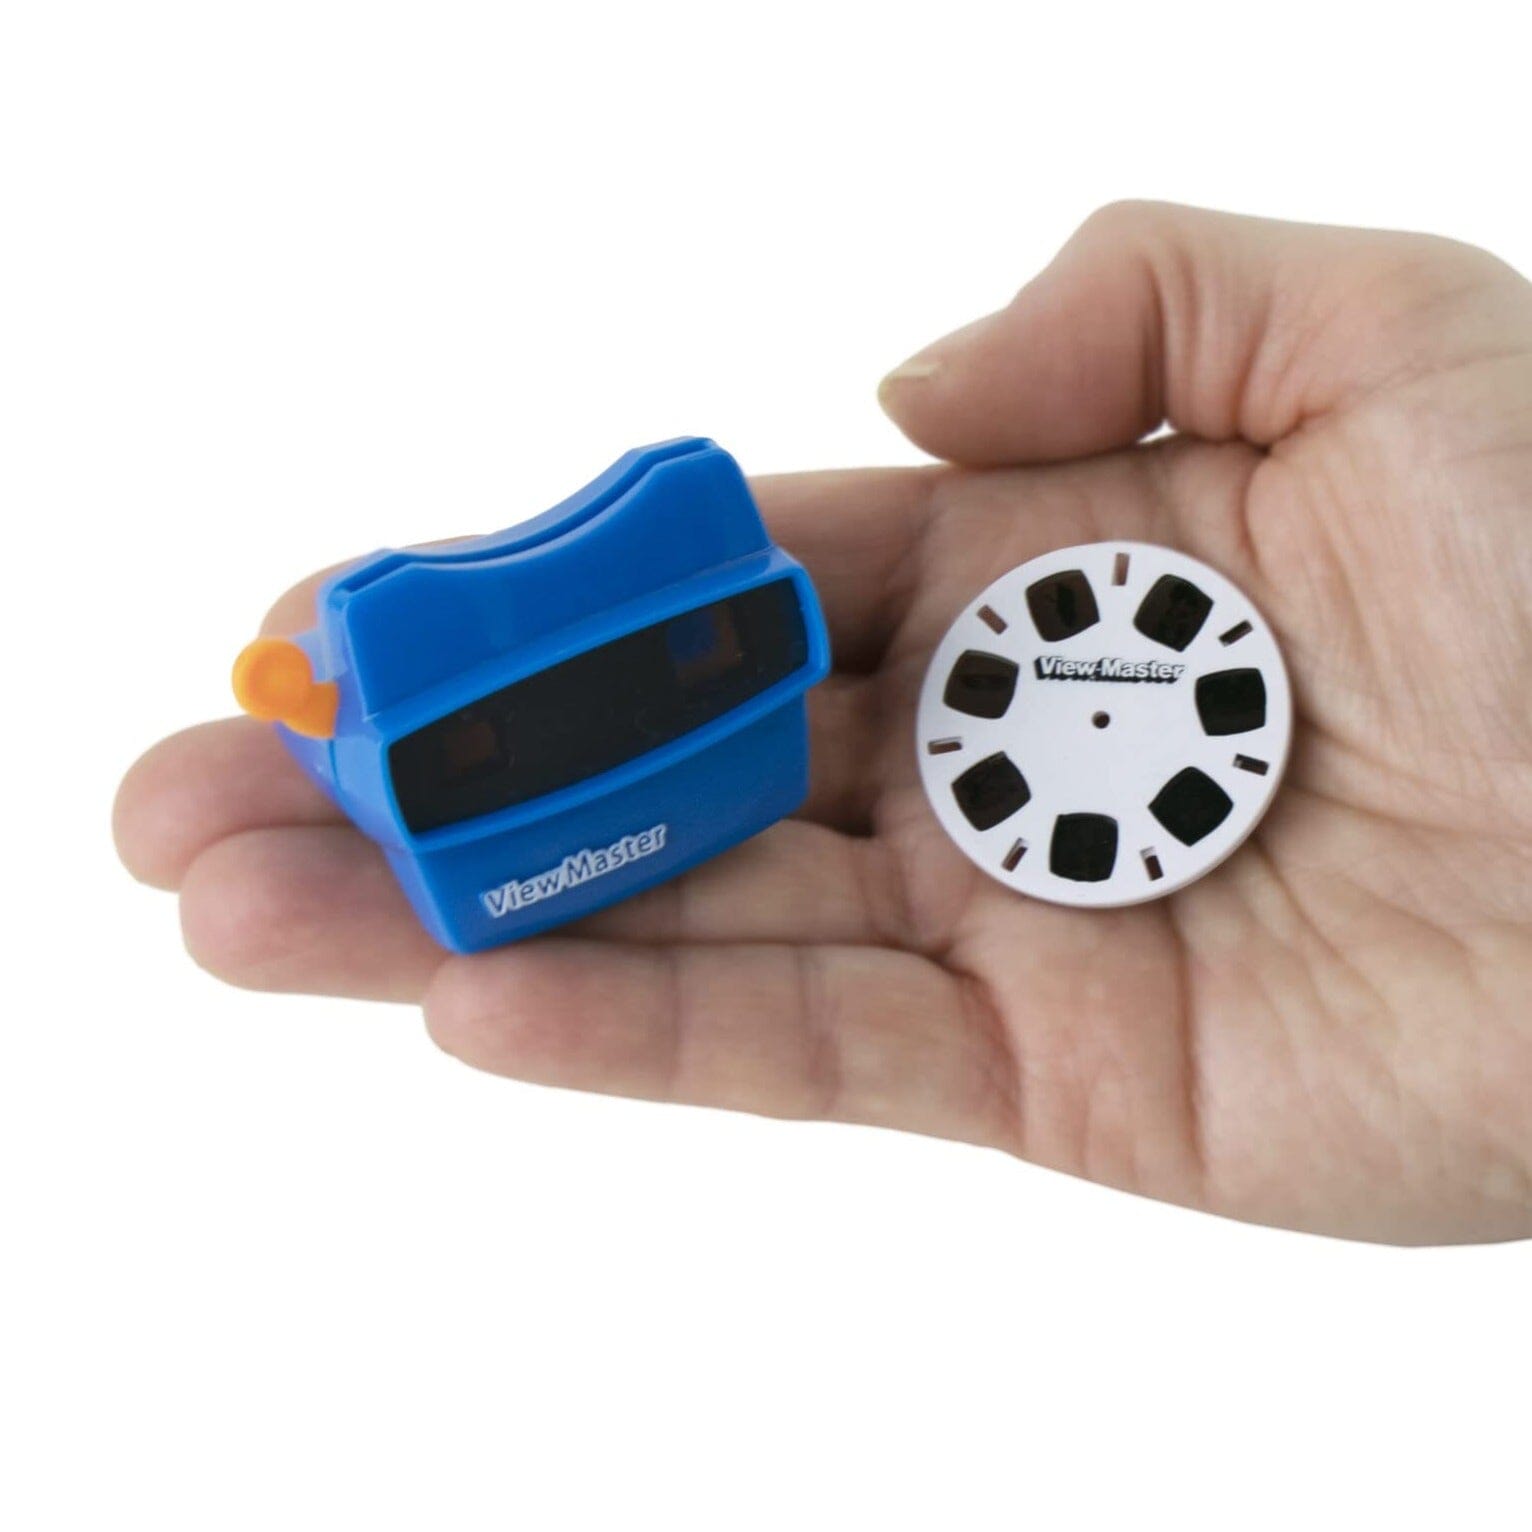 World's Smallest Viewmaster, Hot Wheels Super Impulse 